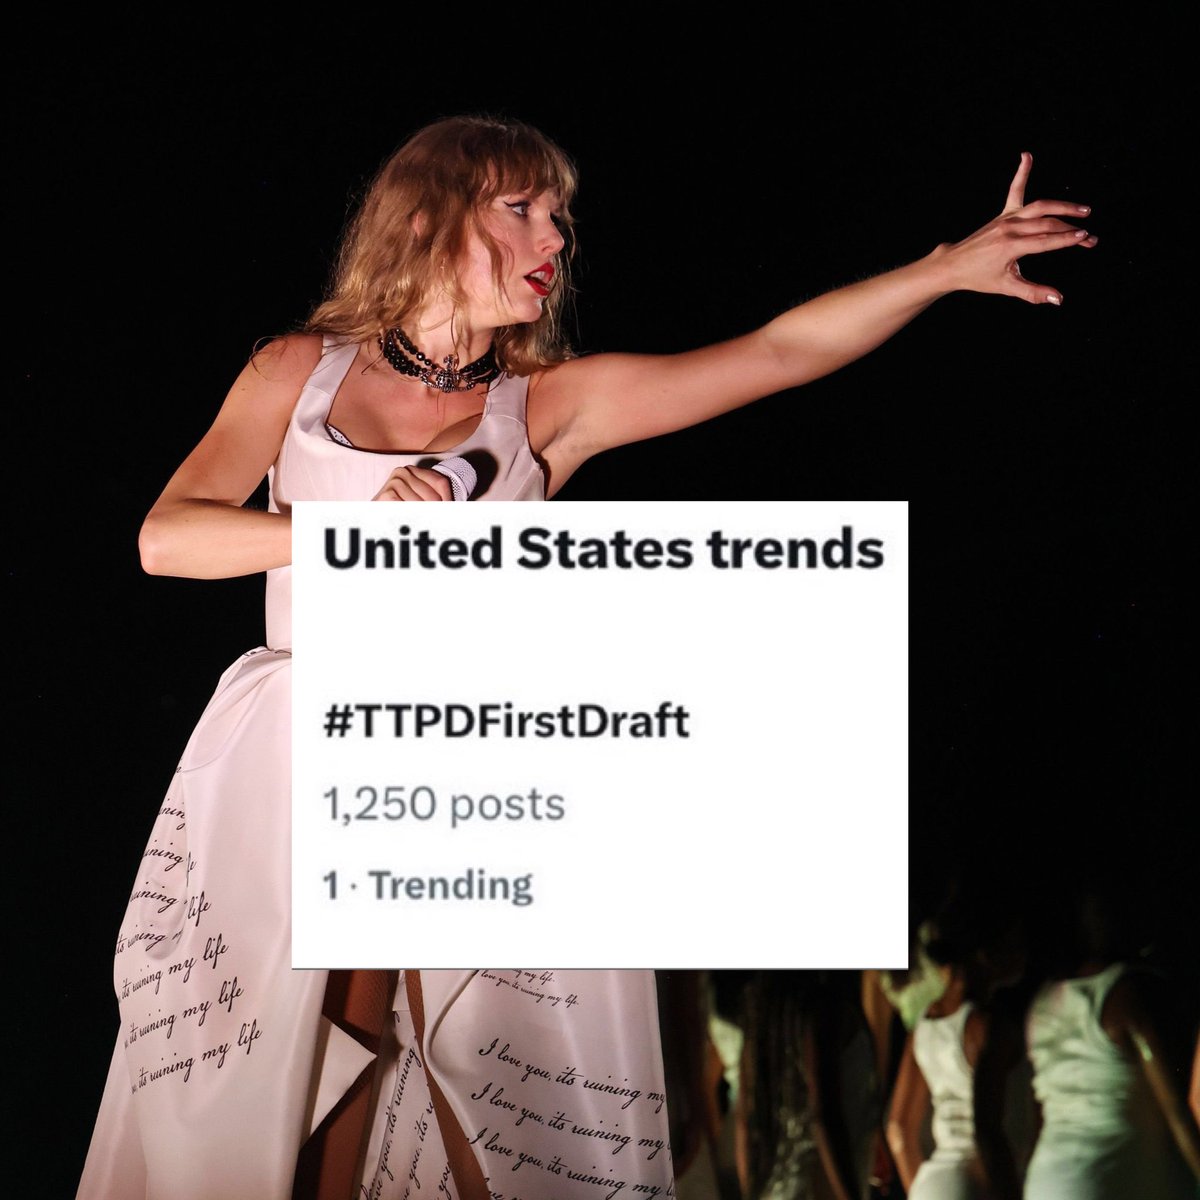 🤍| #TTPDFirstDraft trends at #1 on US Twitter!